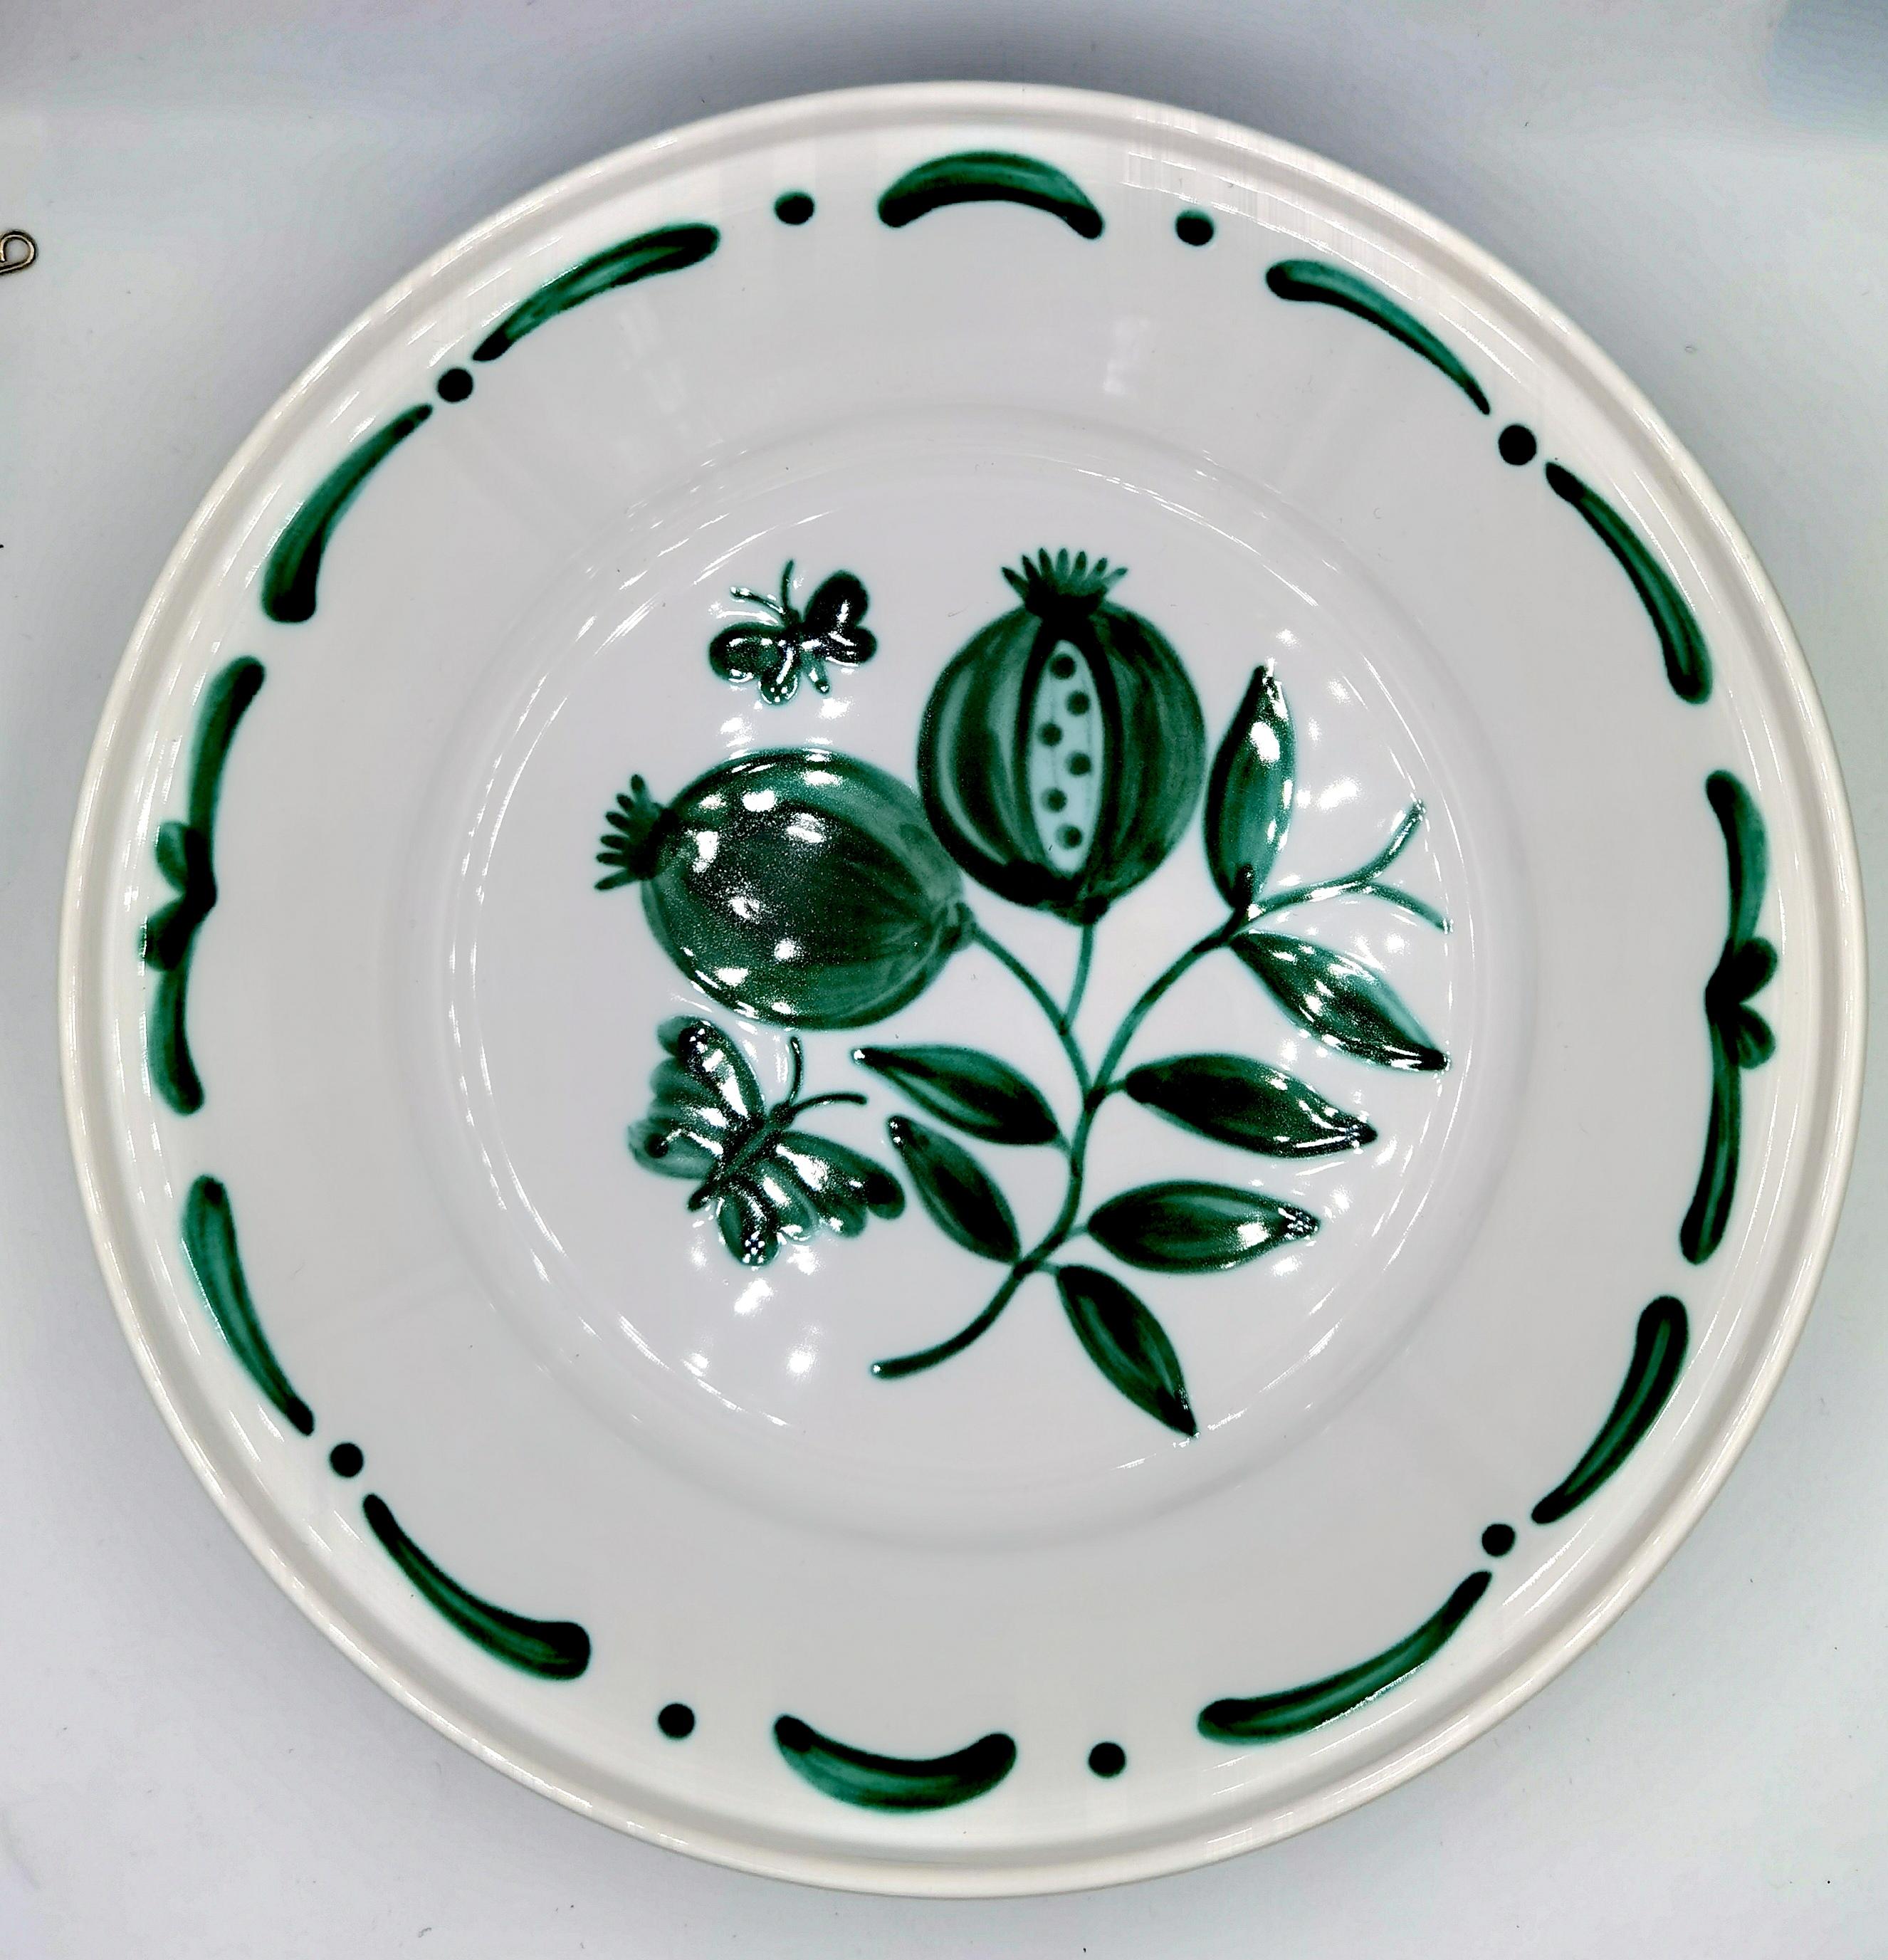 Large hands-free painted pottery dish in country style. Decorated with a handpainted green pomegranate decor in the center with butterflies and a hands-free painted garlande in green. The garlande can be ordered in different colors. Produced and